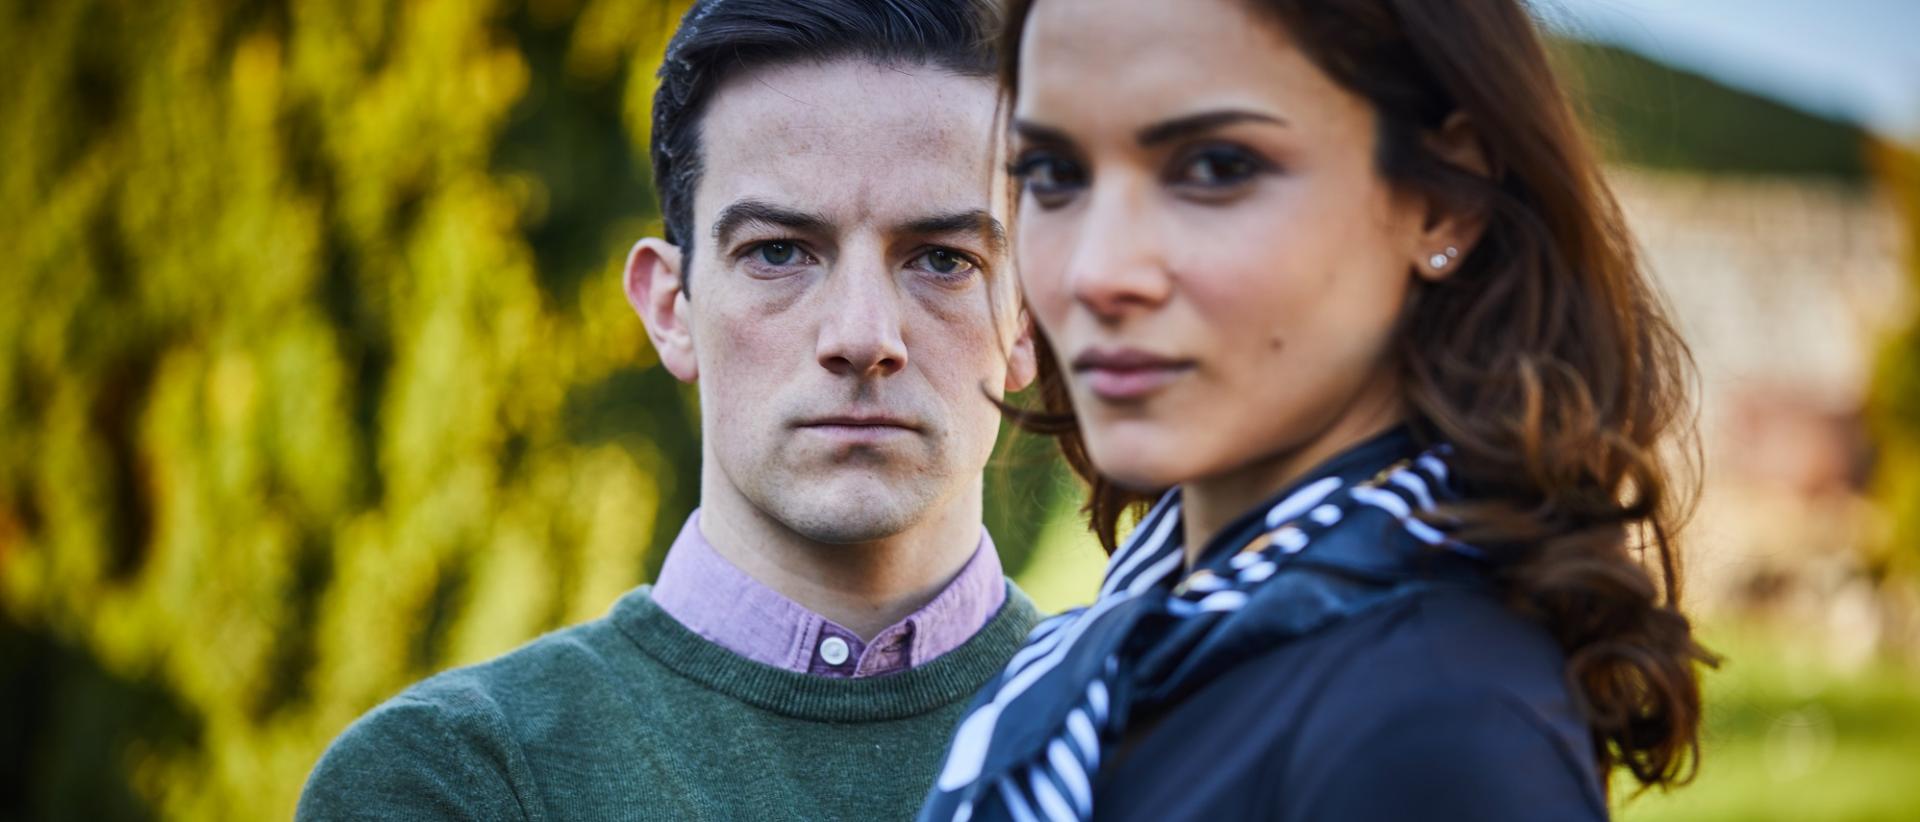 a man and woman stand in a garden looking serious